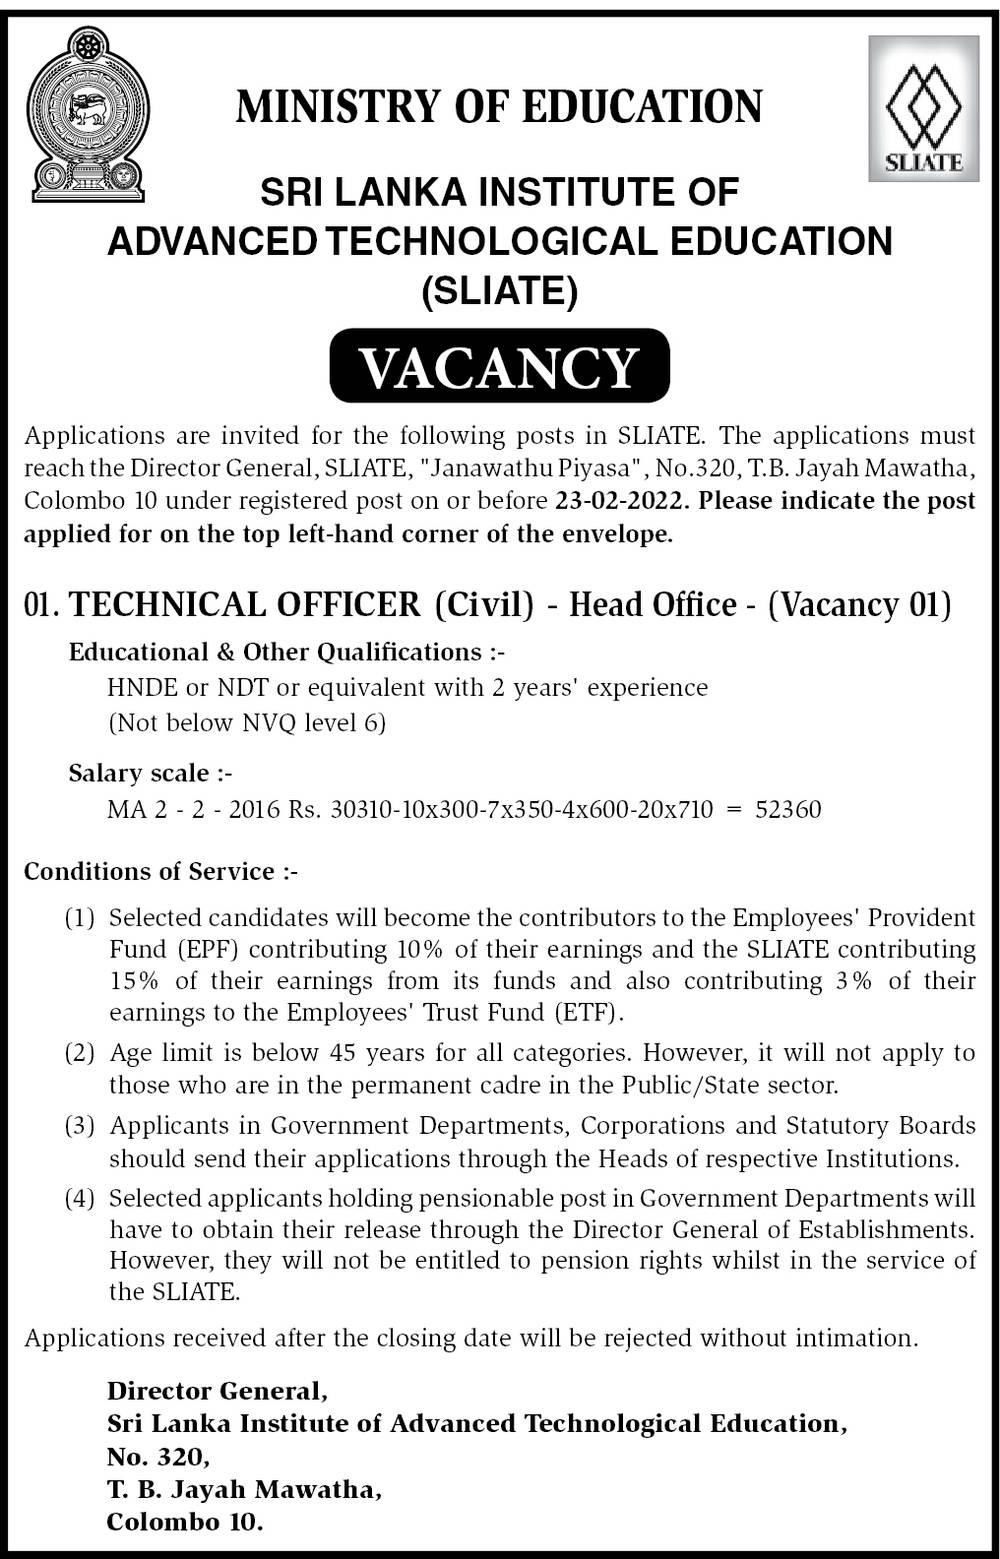 Technical Officer (Civil) Job Vacancy in SLIATE English Details